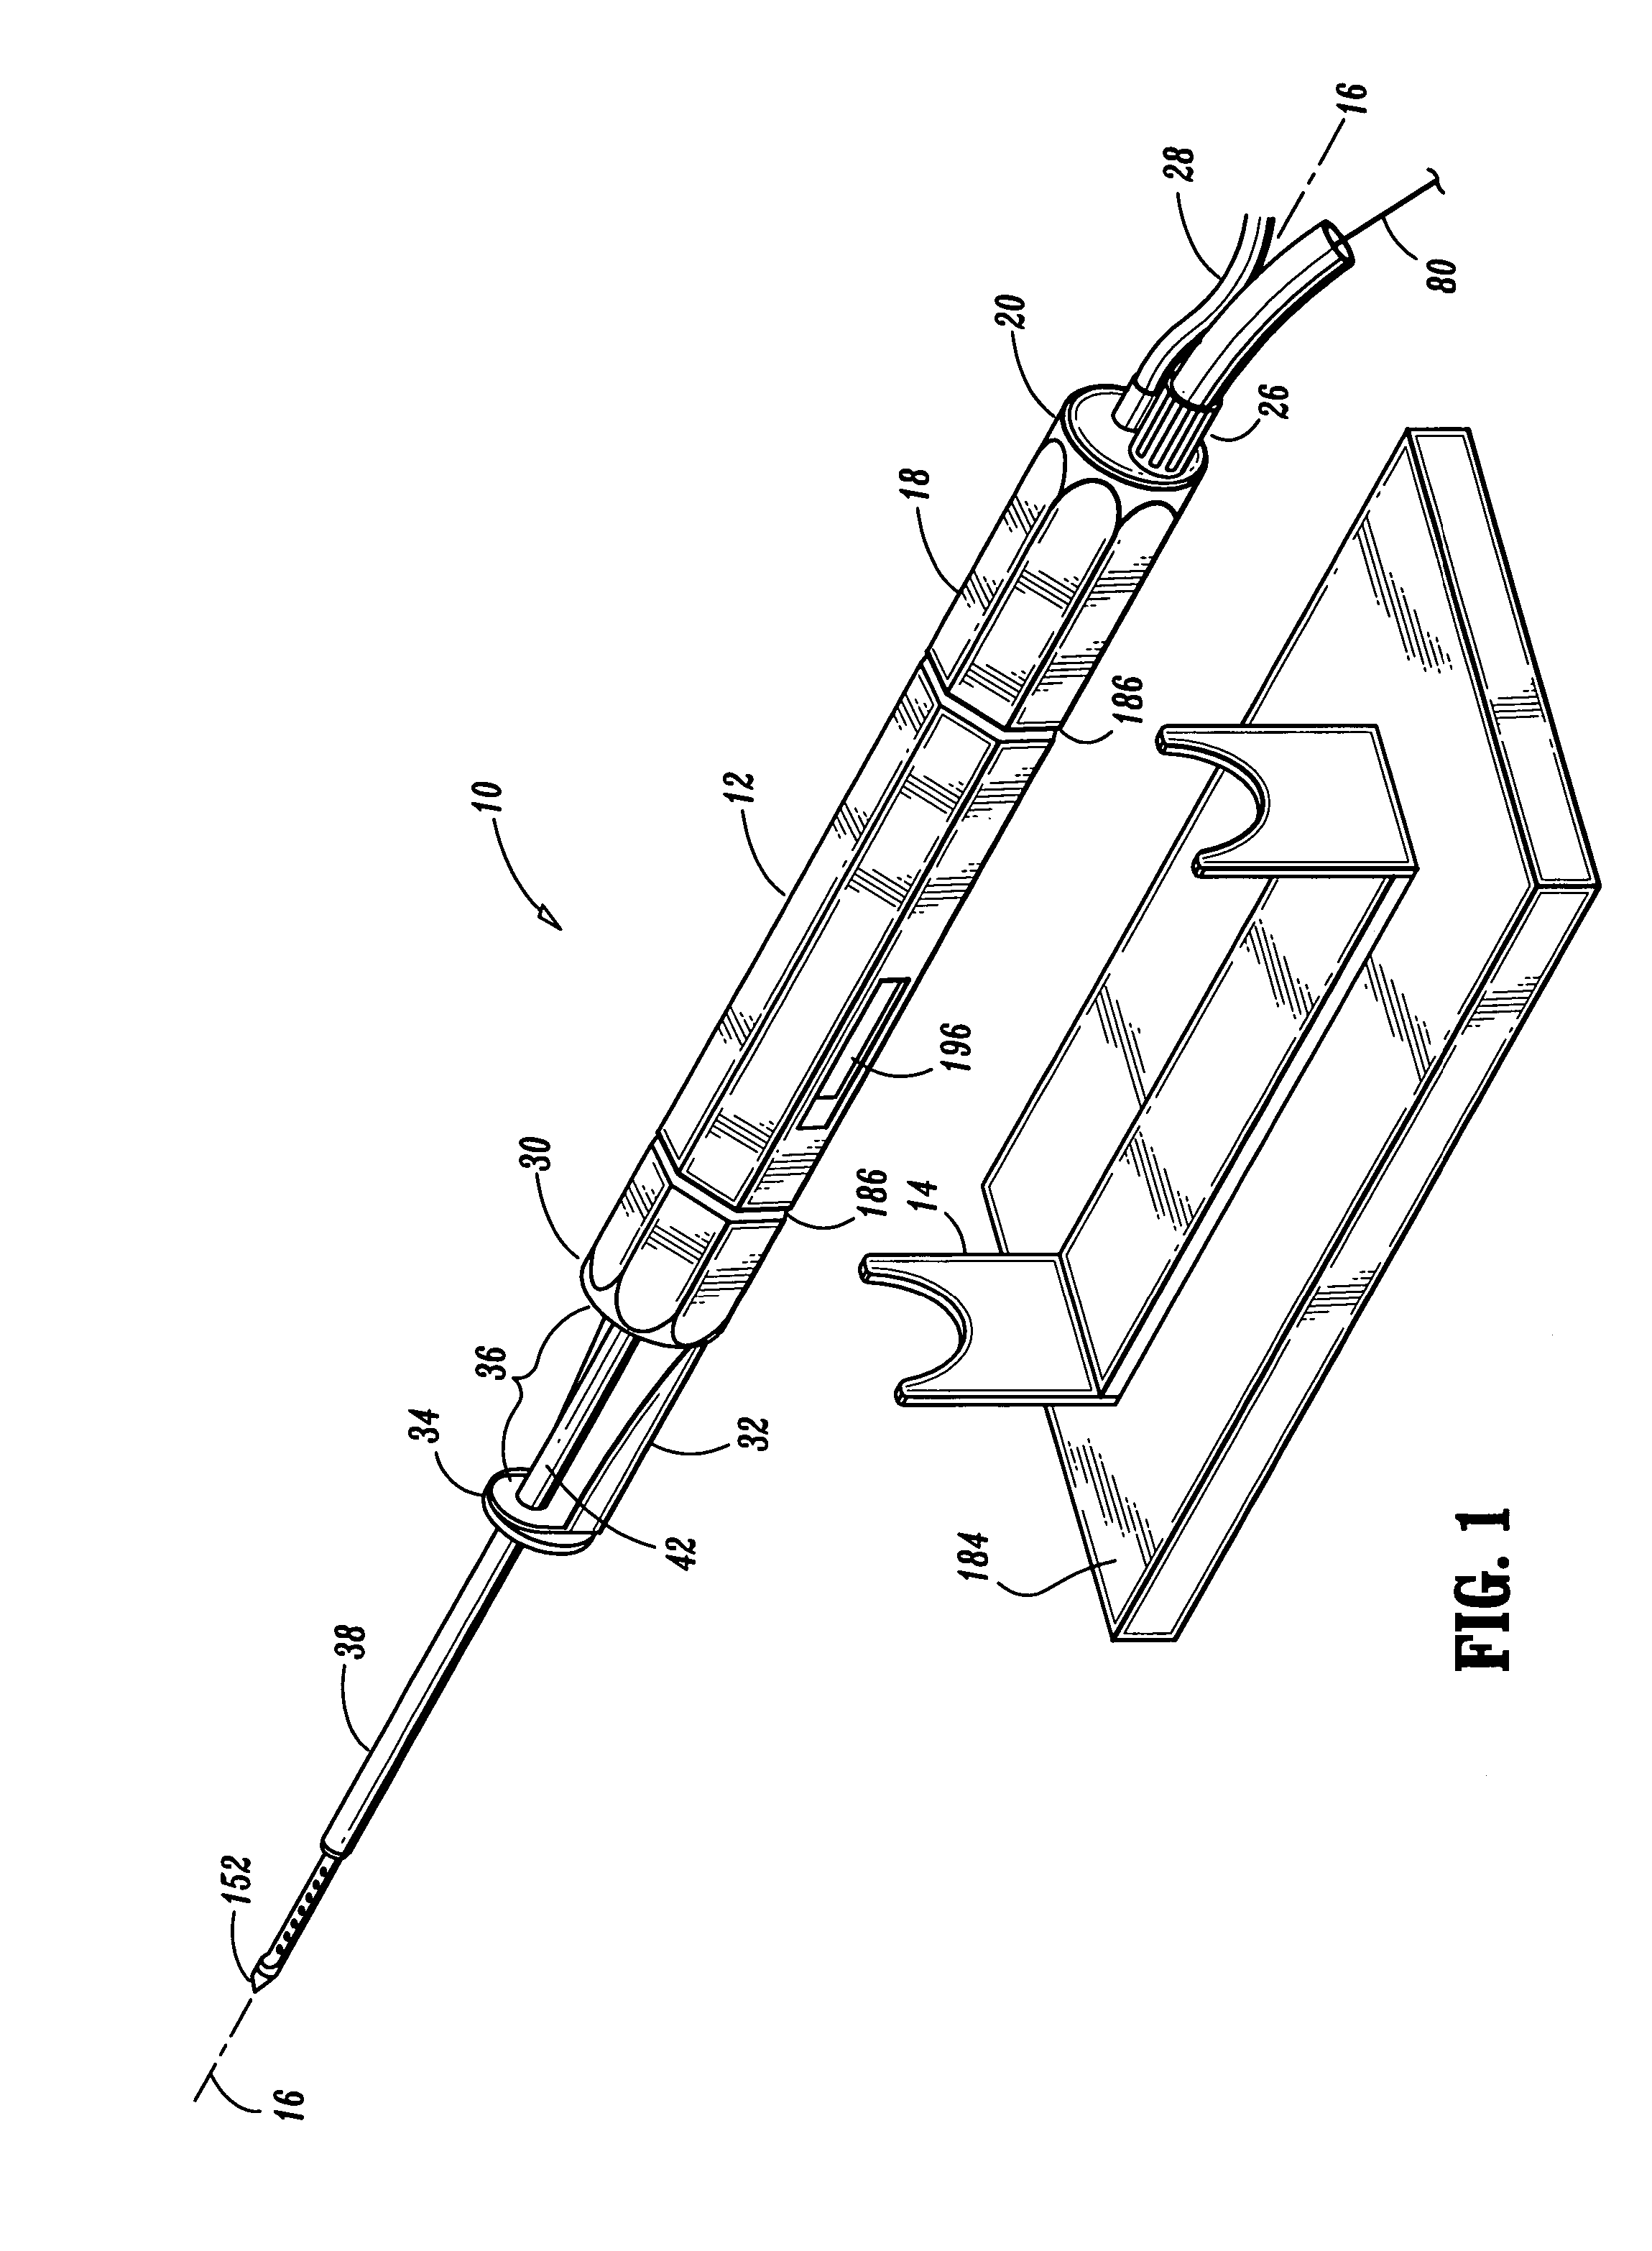 Tissue sampling and removal apparatus and method